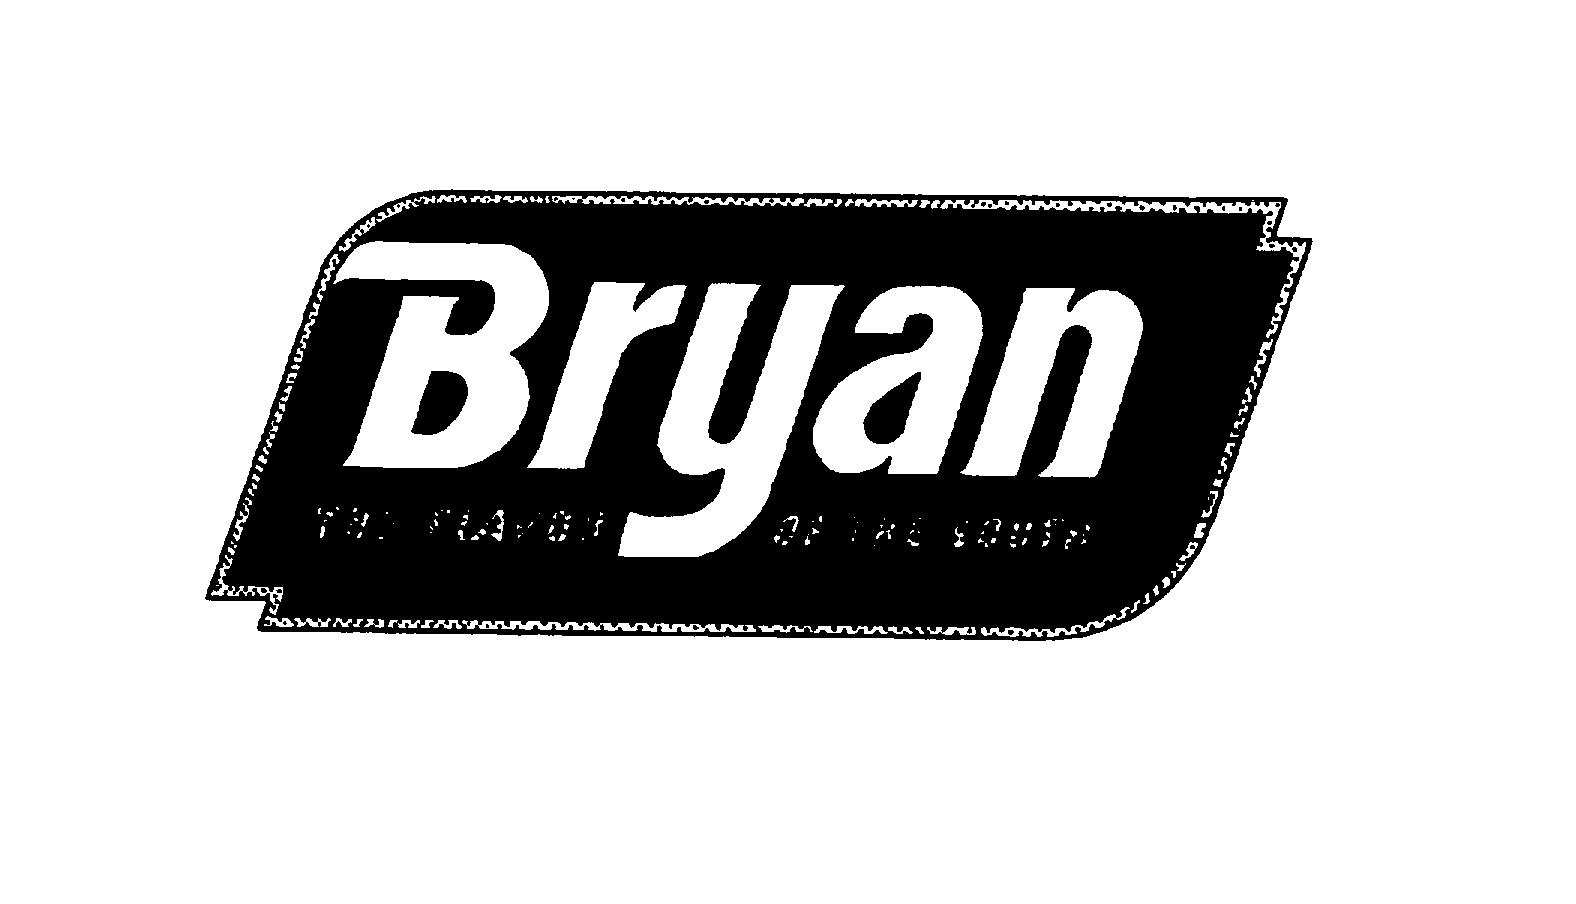 BRYAN THE FLAVOR OF THE SOUTH